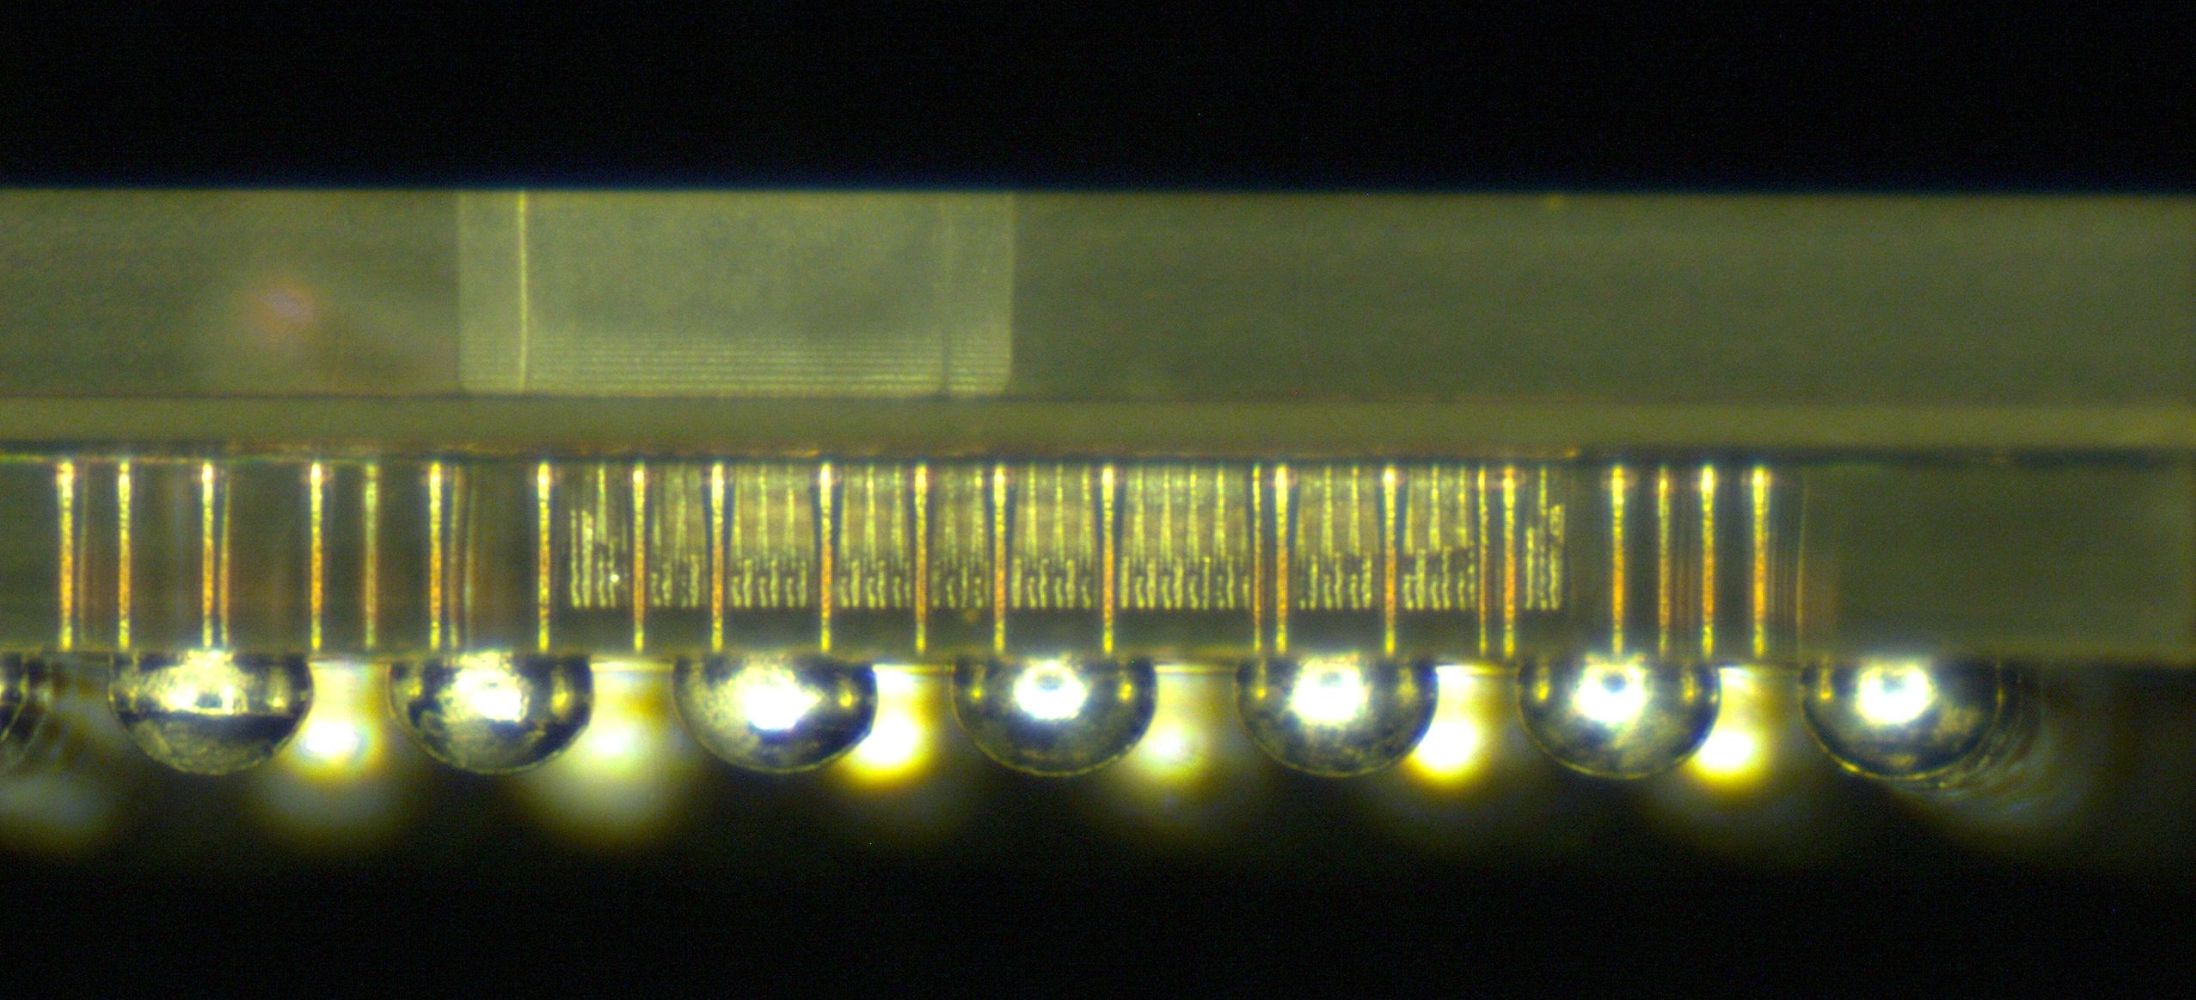 The side view of the glass package shows its three-layered structure, vias, and solder balls.